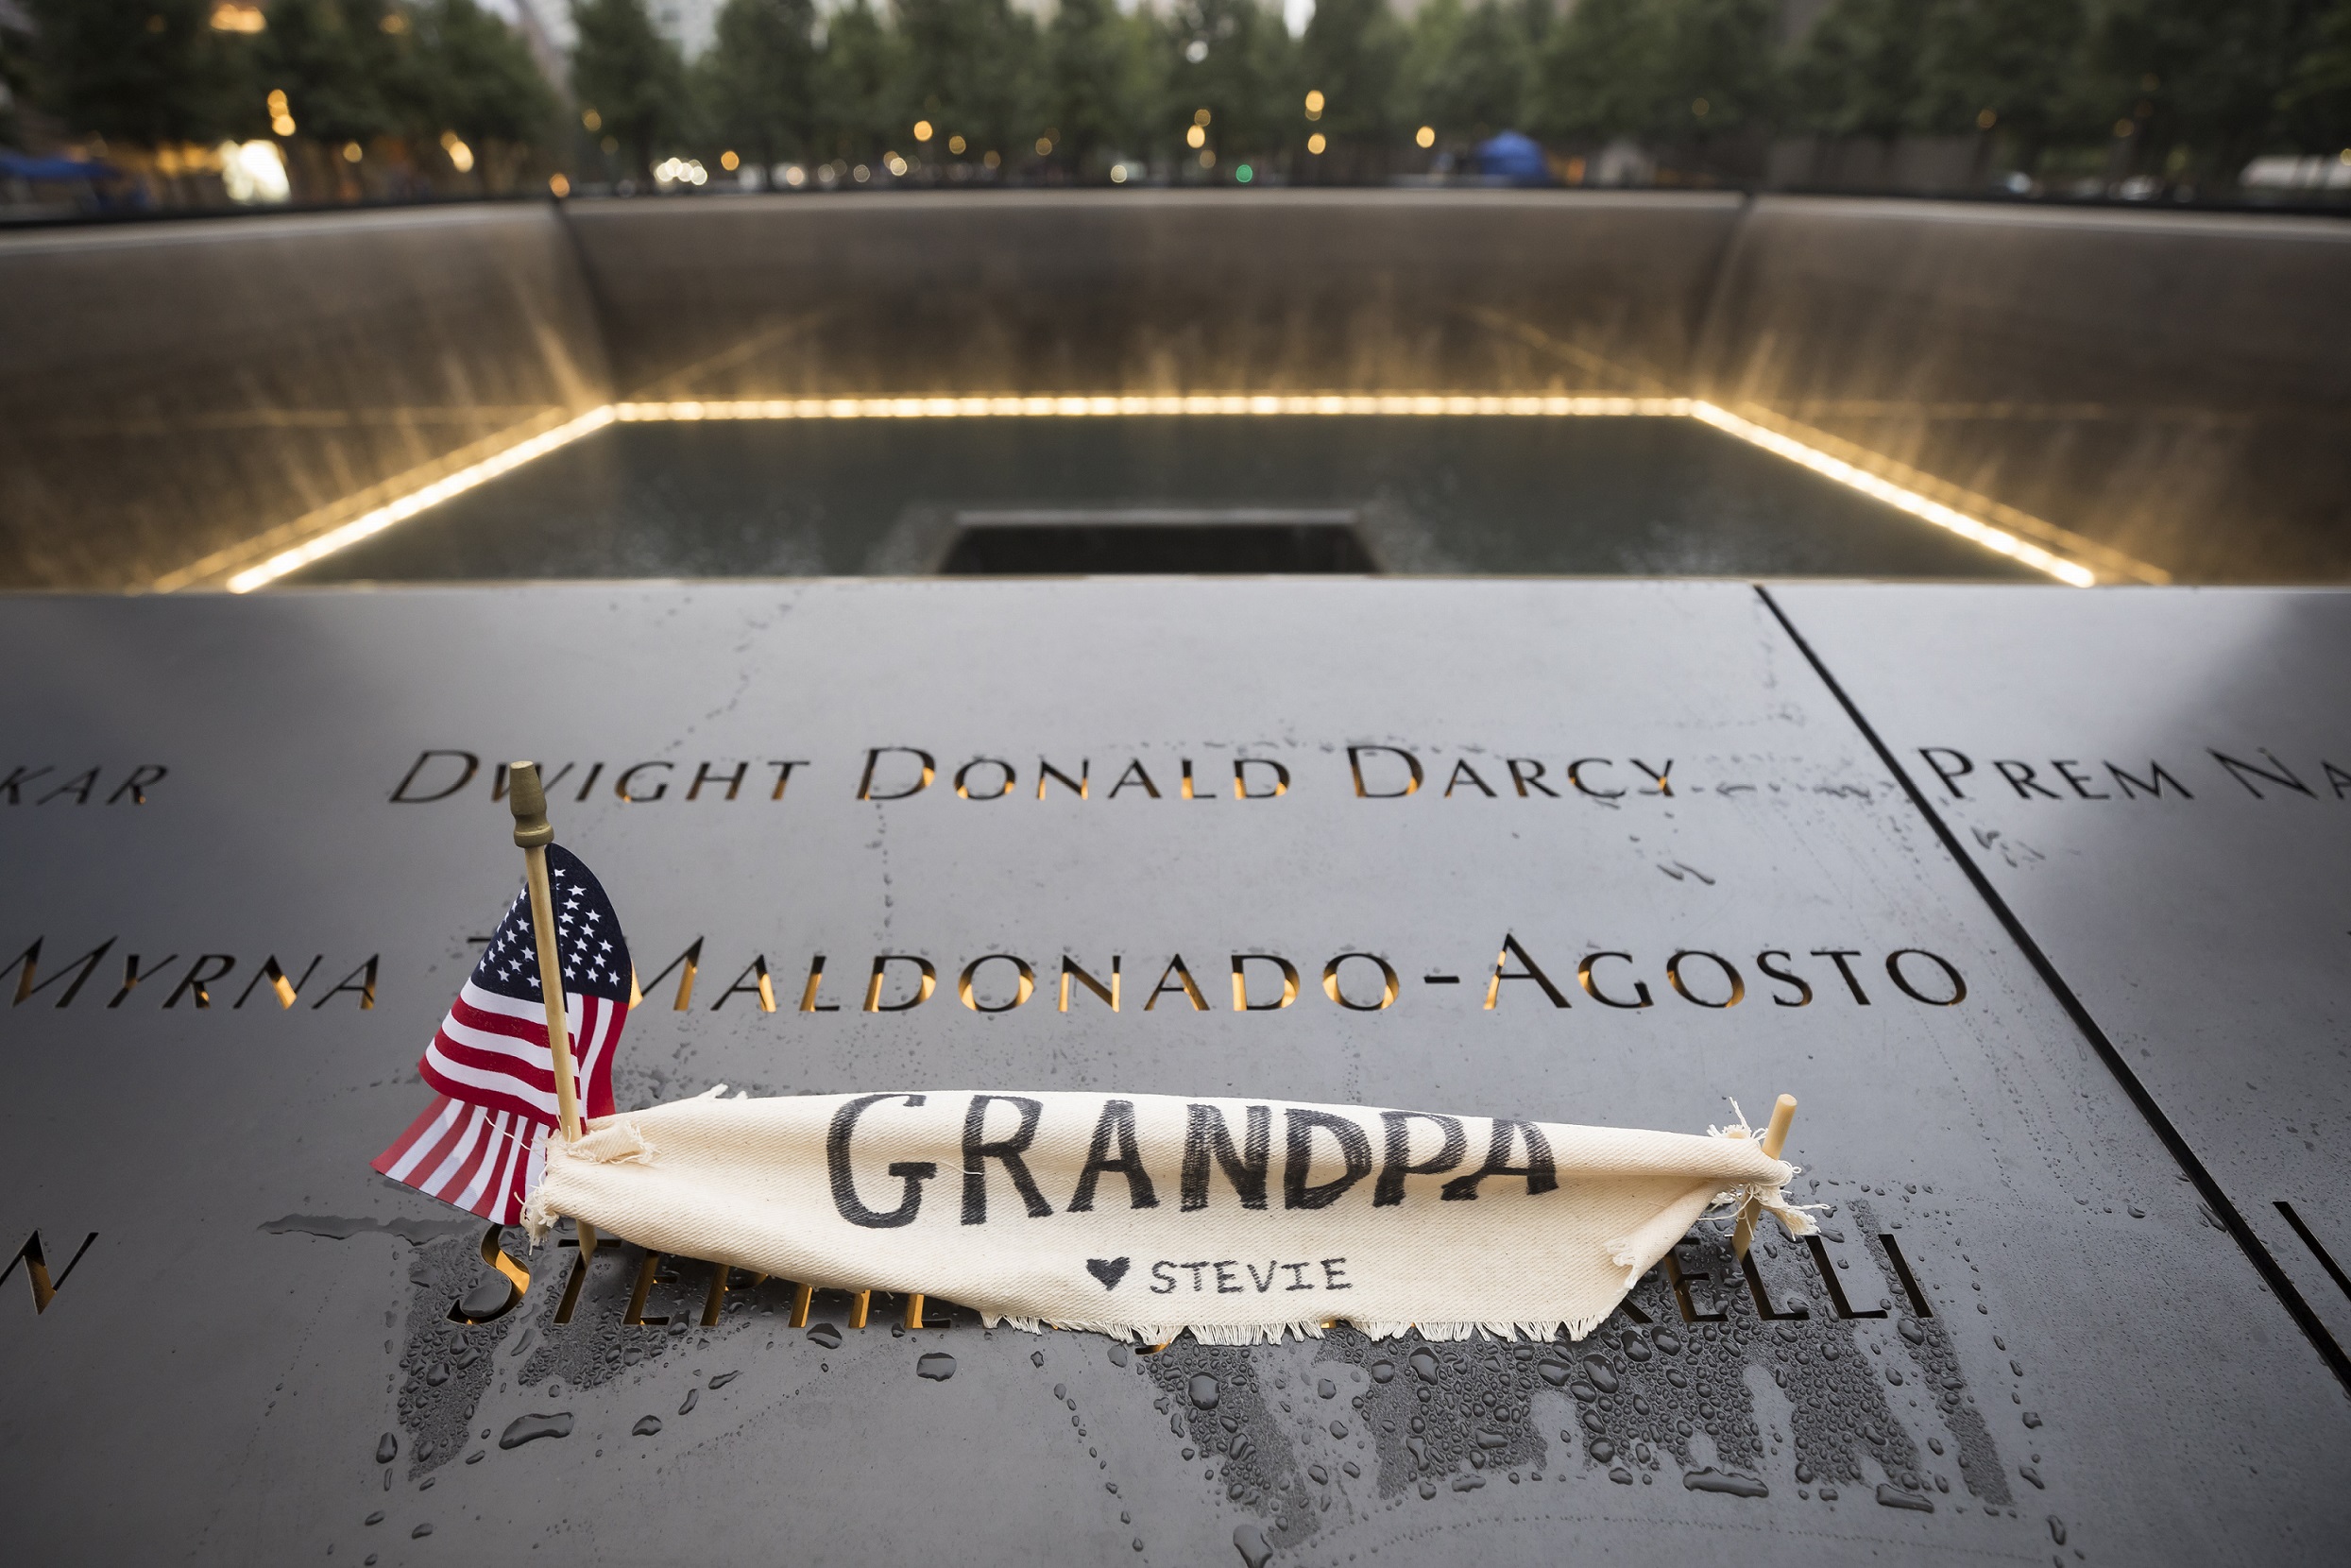 A small American flag and a hand-written note have been placed at a victim’s name on a bronze parapet at the Memorial. The note is written on a piece of cloth and reads “Grandpa.” Water cascades down a lit reflecting pool in the background.